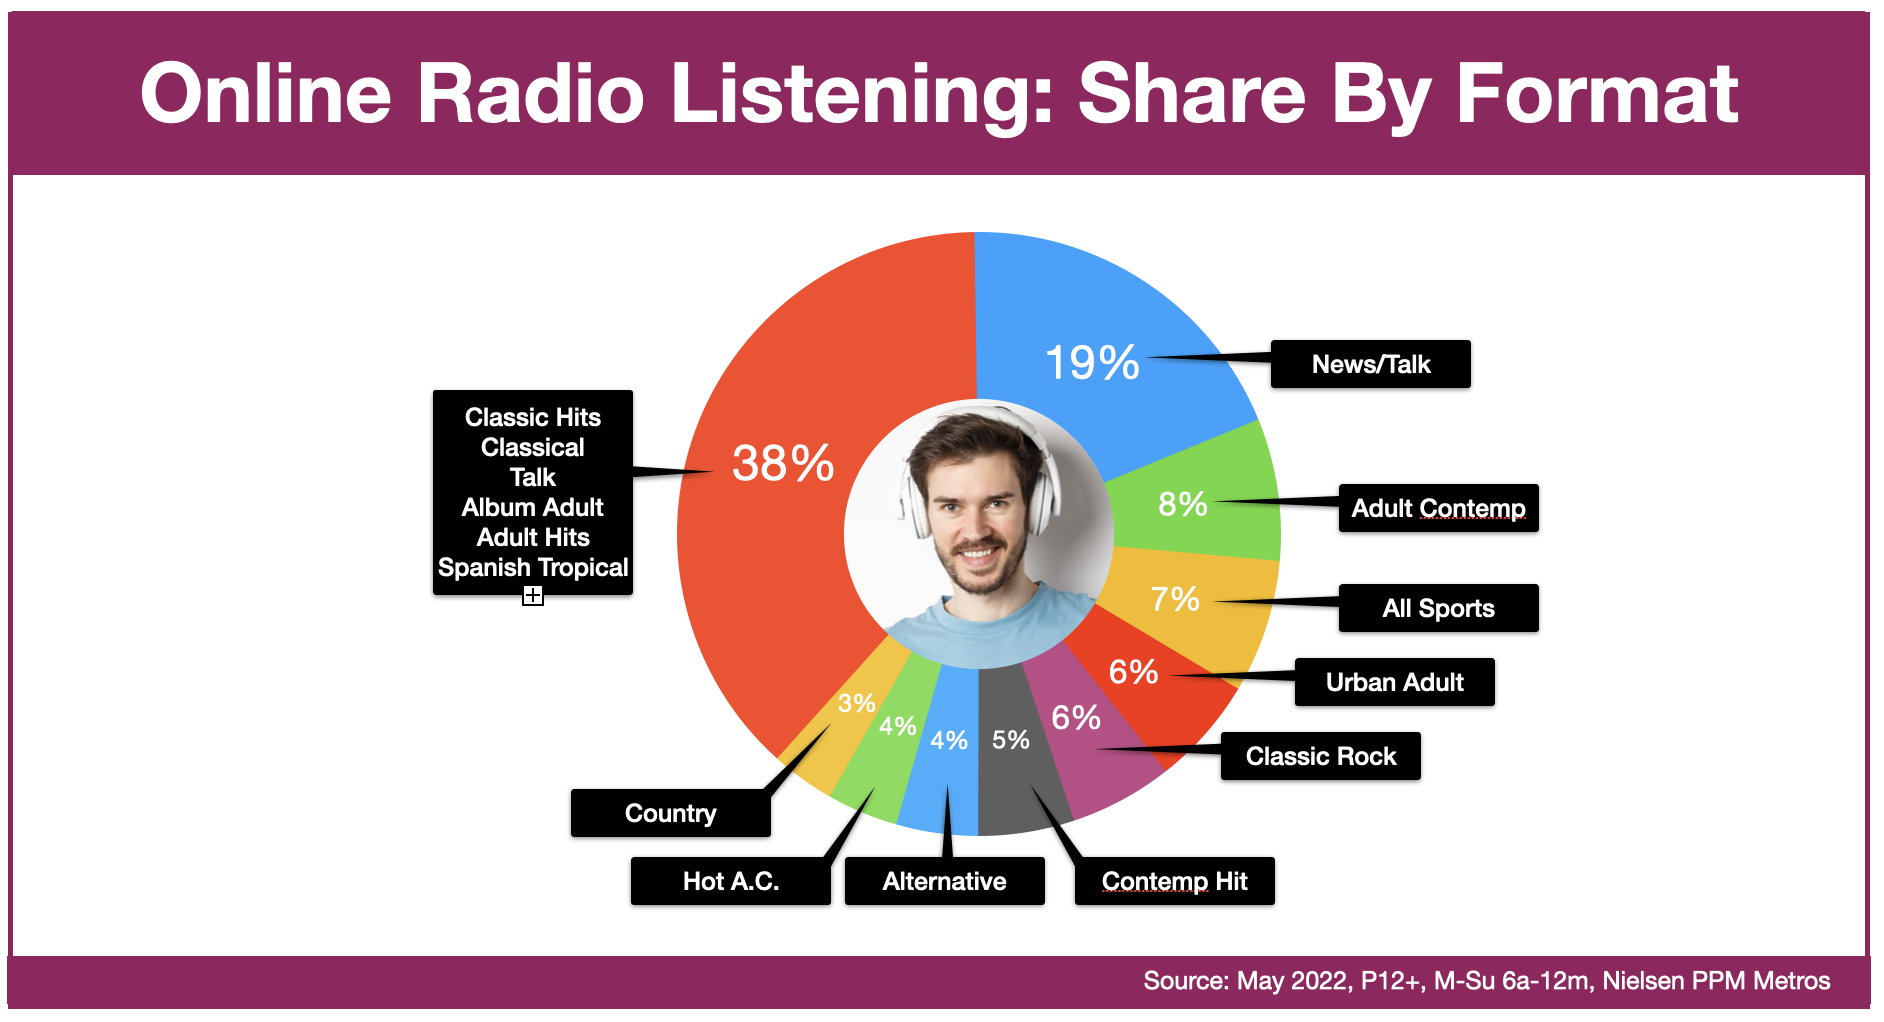 Advertise In Tampa: Online Radio Listening By Format